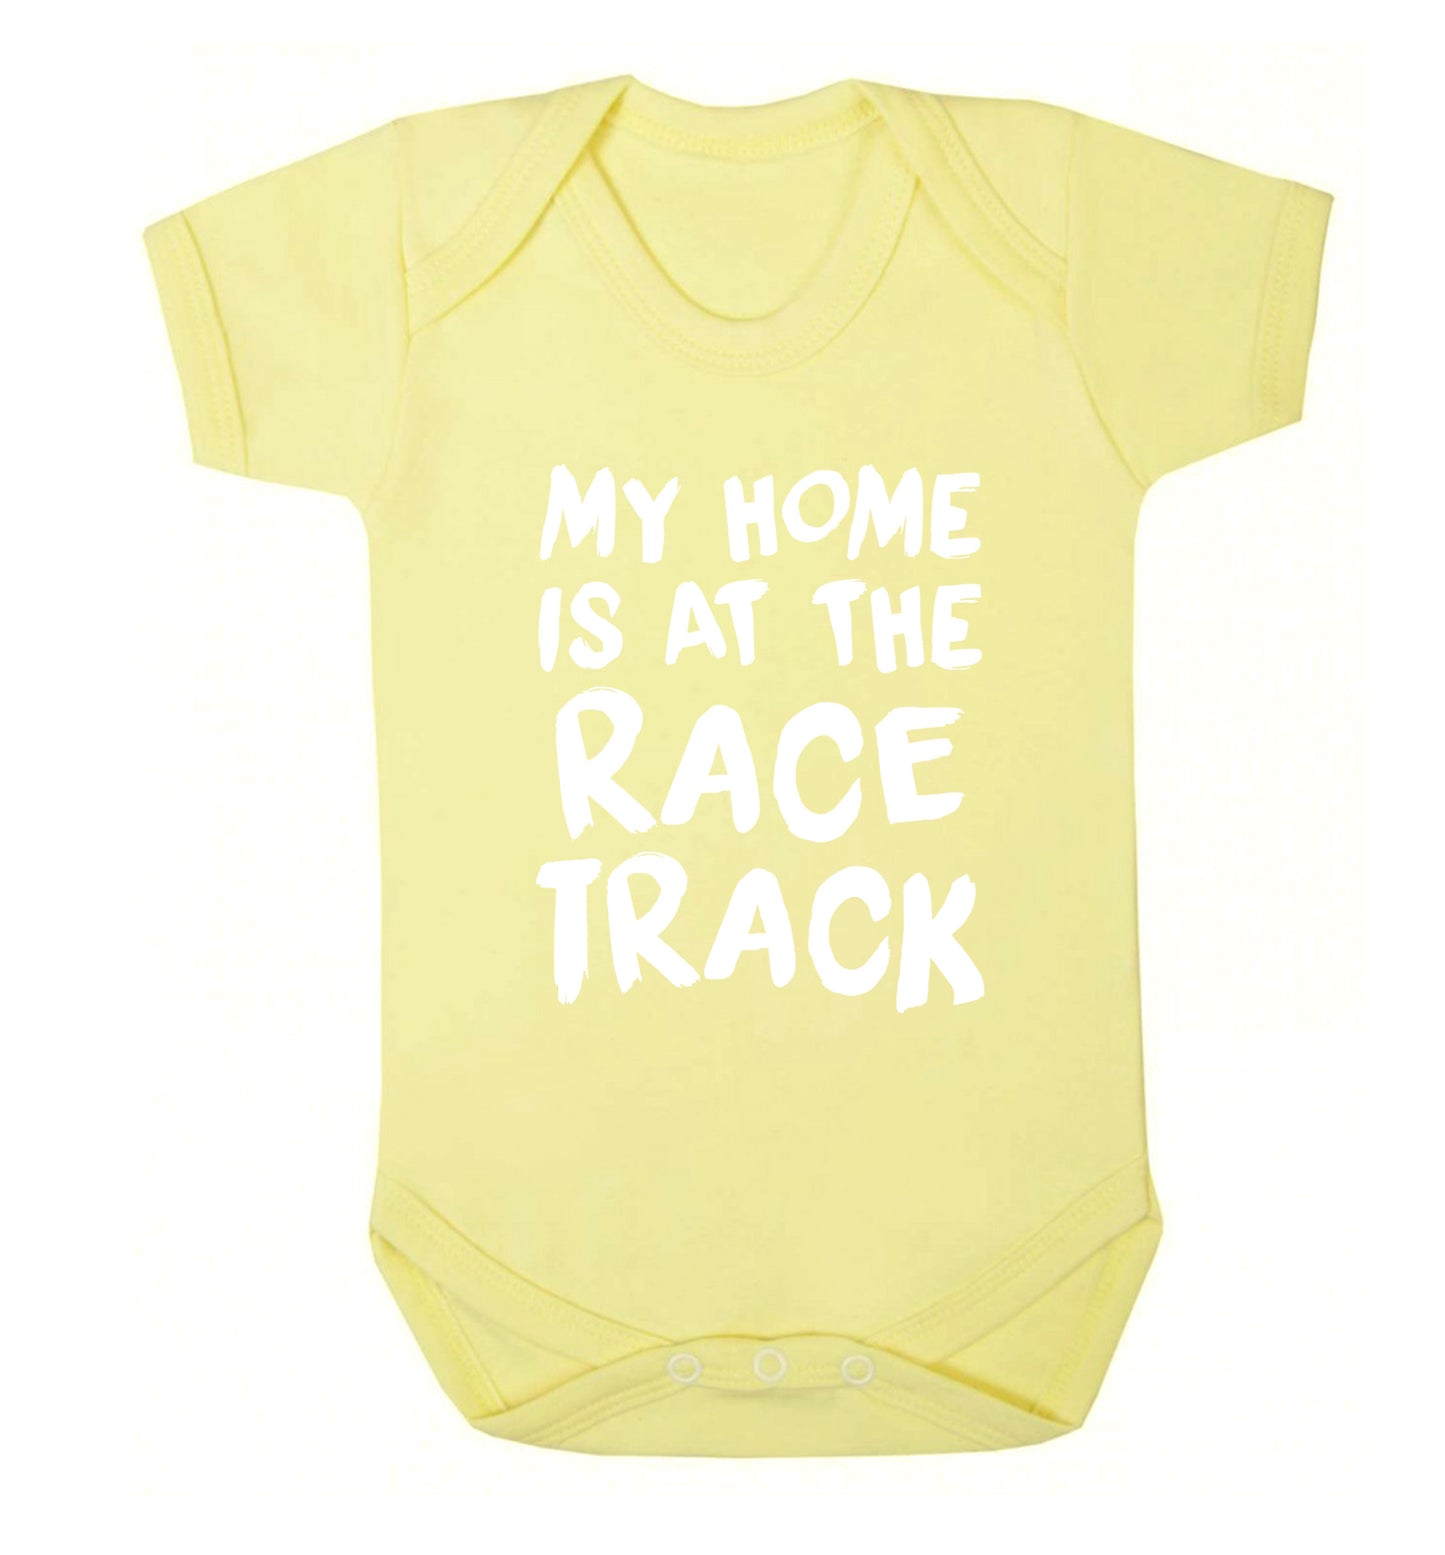 My home is at the race track Baby Vest pale yellow 18-24 months